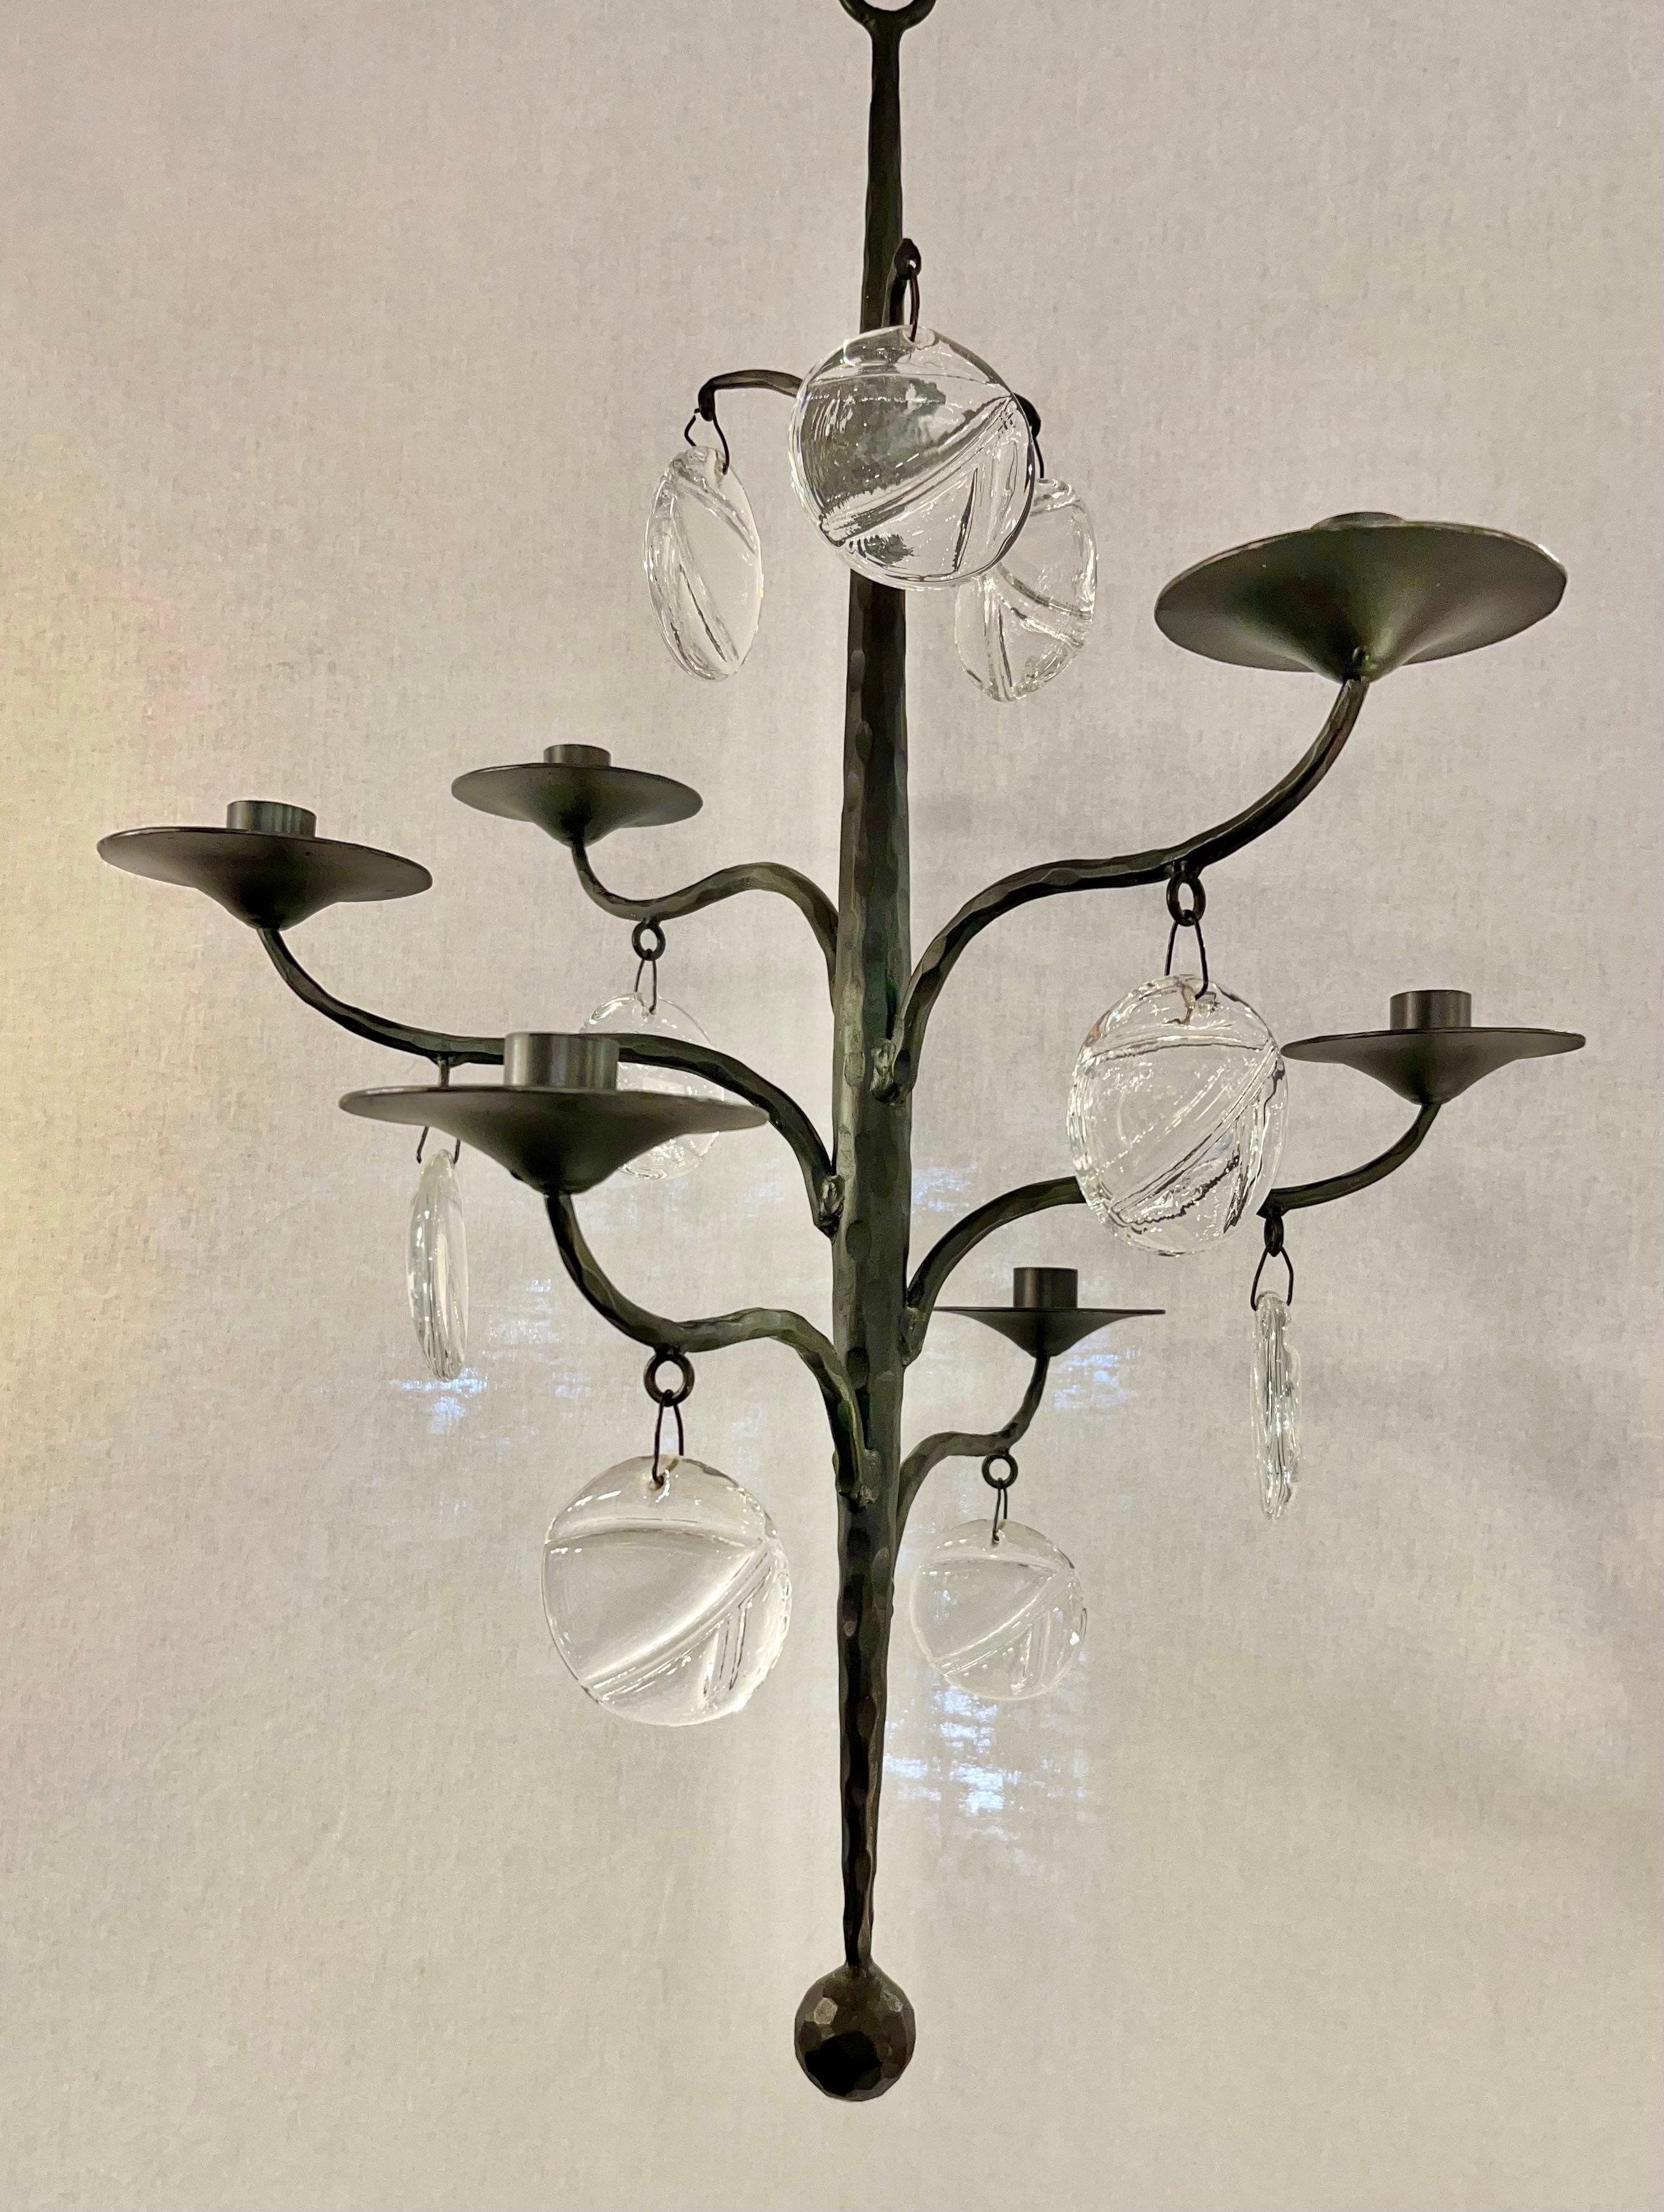 Chandelier by Erik Höglund, for 6 candles, complet and original condition, in bronze and brass. Not wired, only for candles.